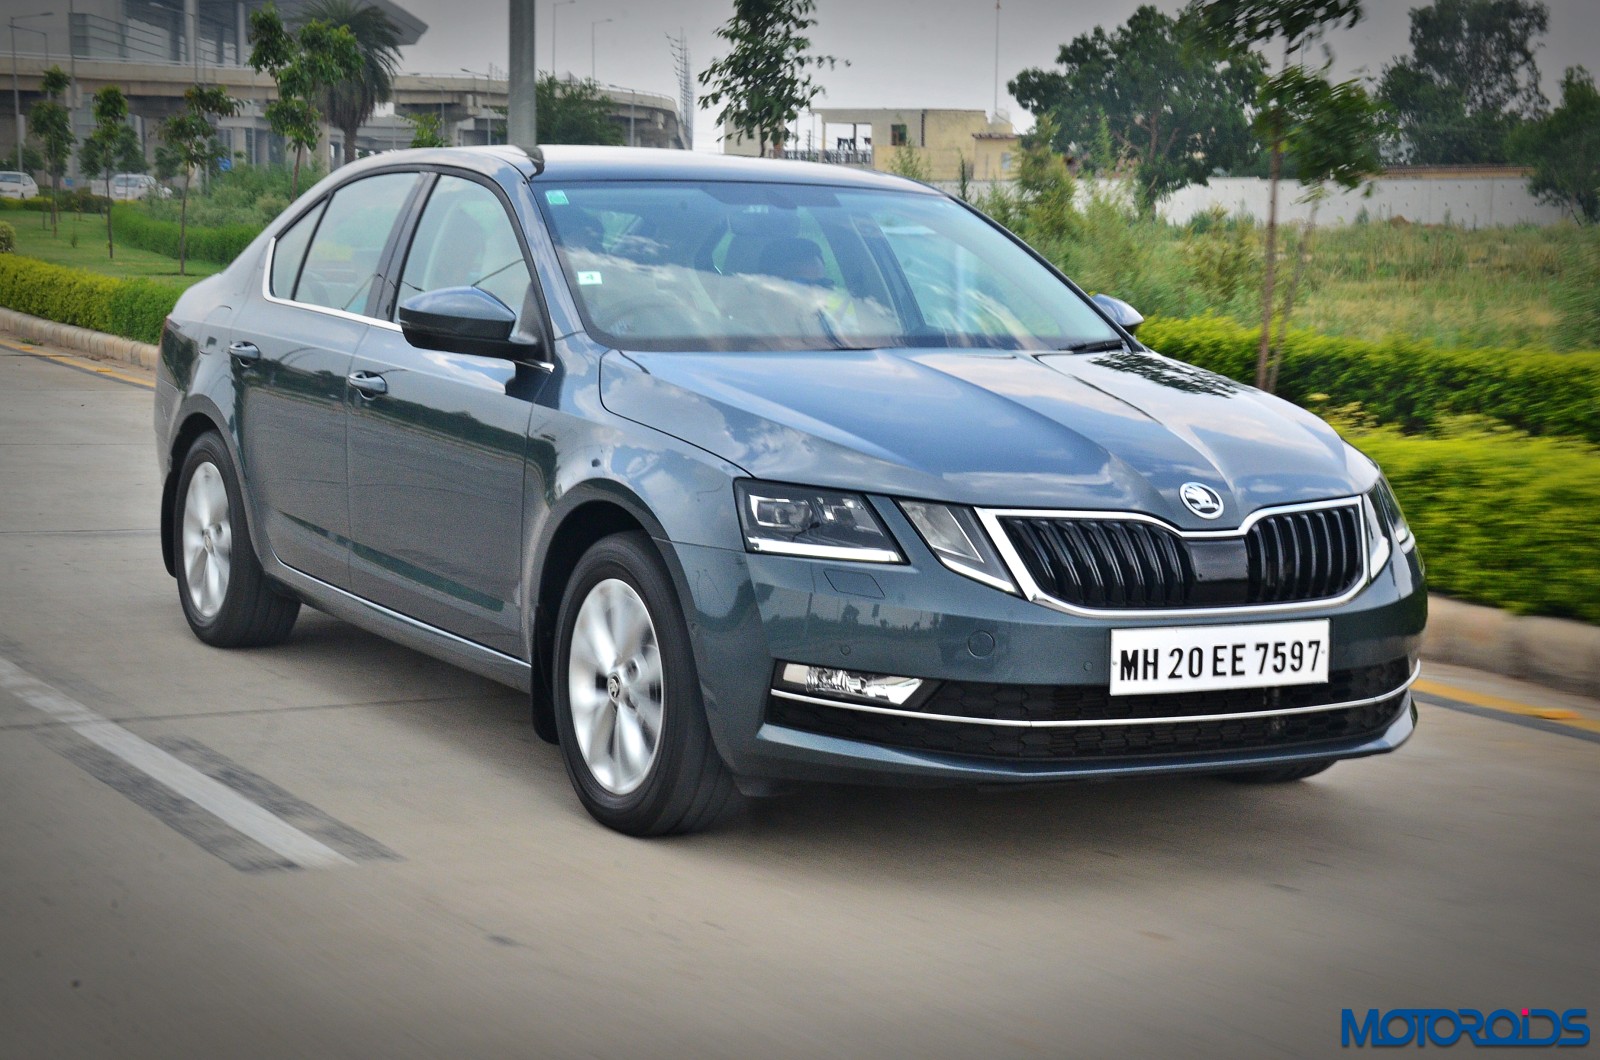 17 Skoda Octavia Facelift Launched In India Official Release And All You Need To Know Motoroids